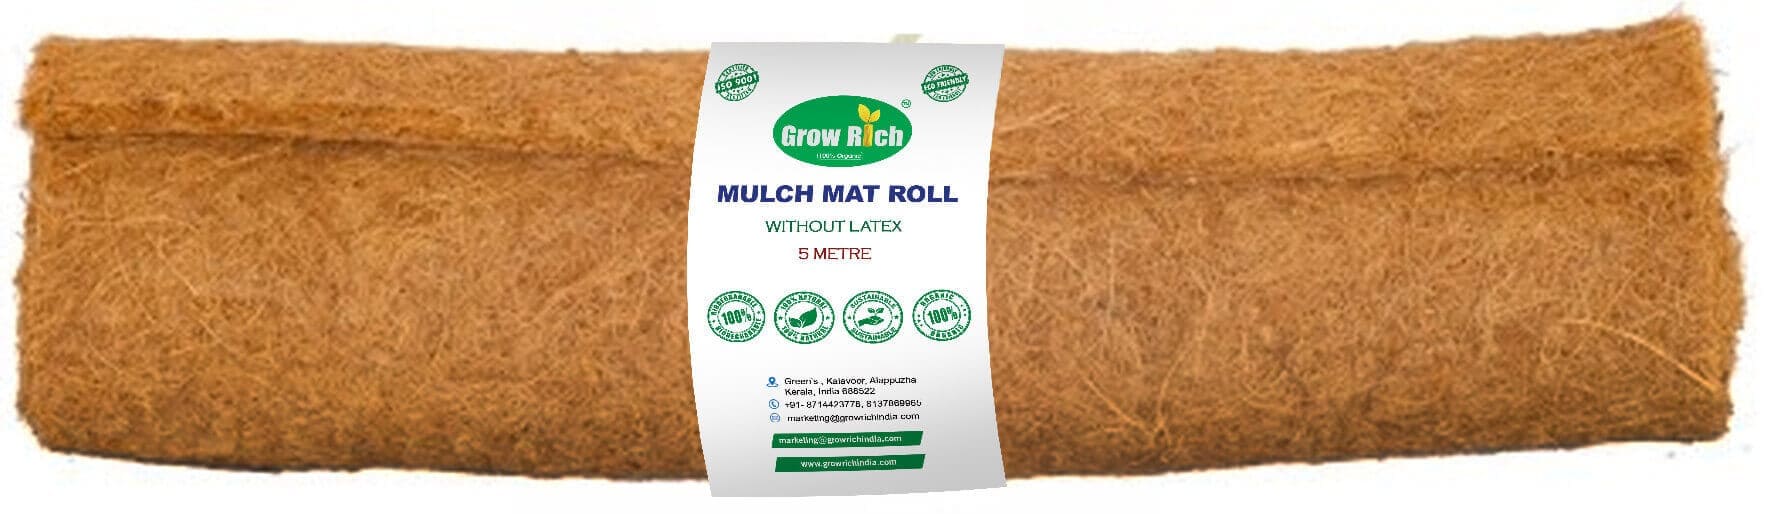 Grow Rich Mulch Mat Roll Without Latex 5m 